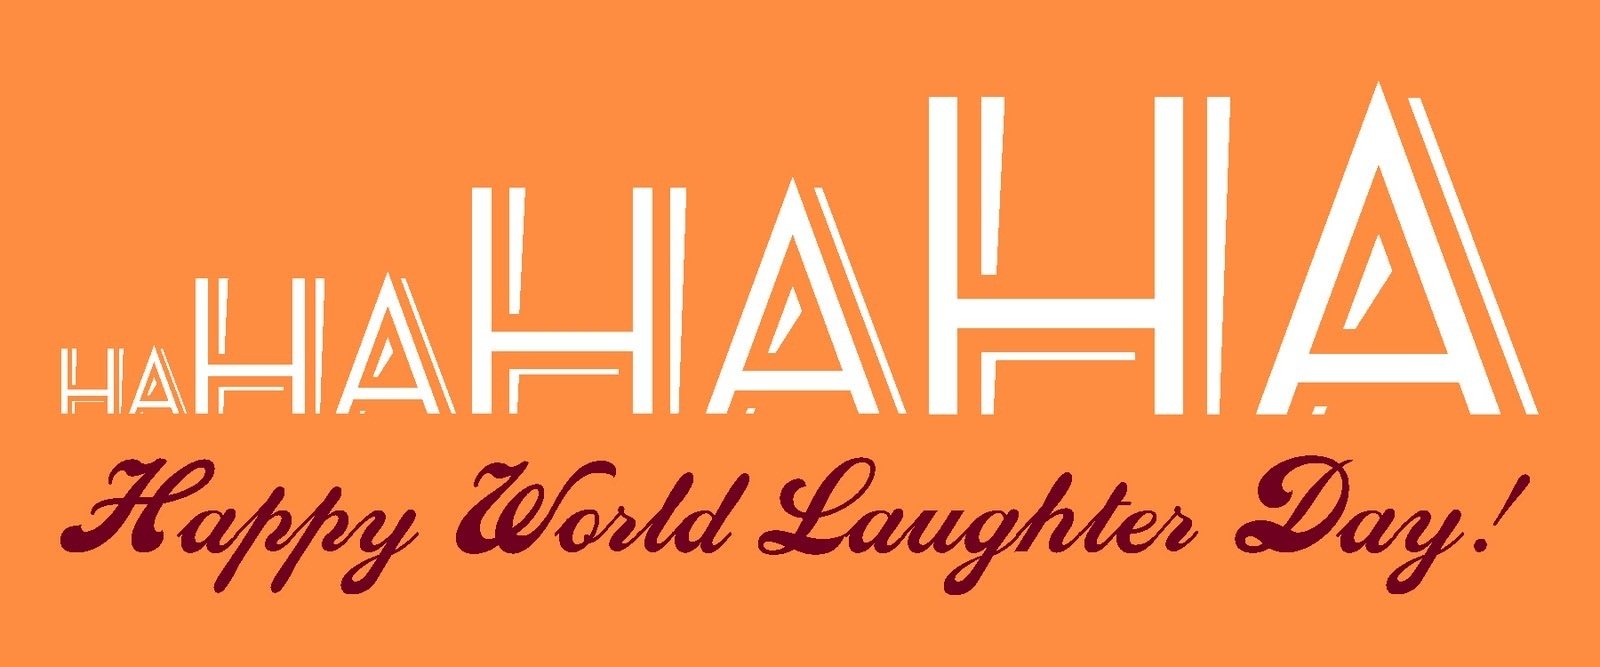 World Laughter Day 2021 Happiness Quotes Wishes and HD Images Positive  Messages Funny Memes Greetings Telegram Photos and Wallpapers to Spread  Smiles on This Day   LatestLY